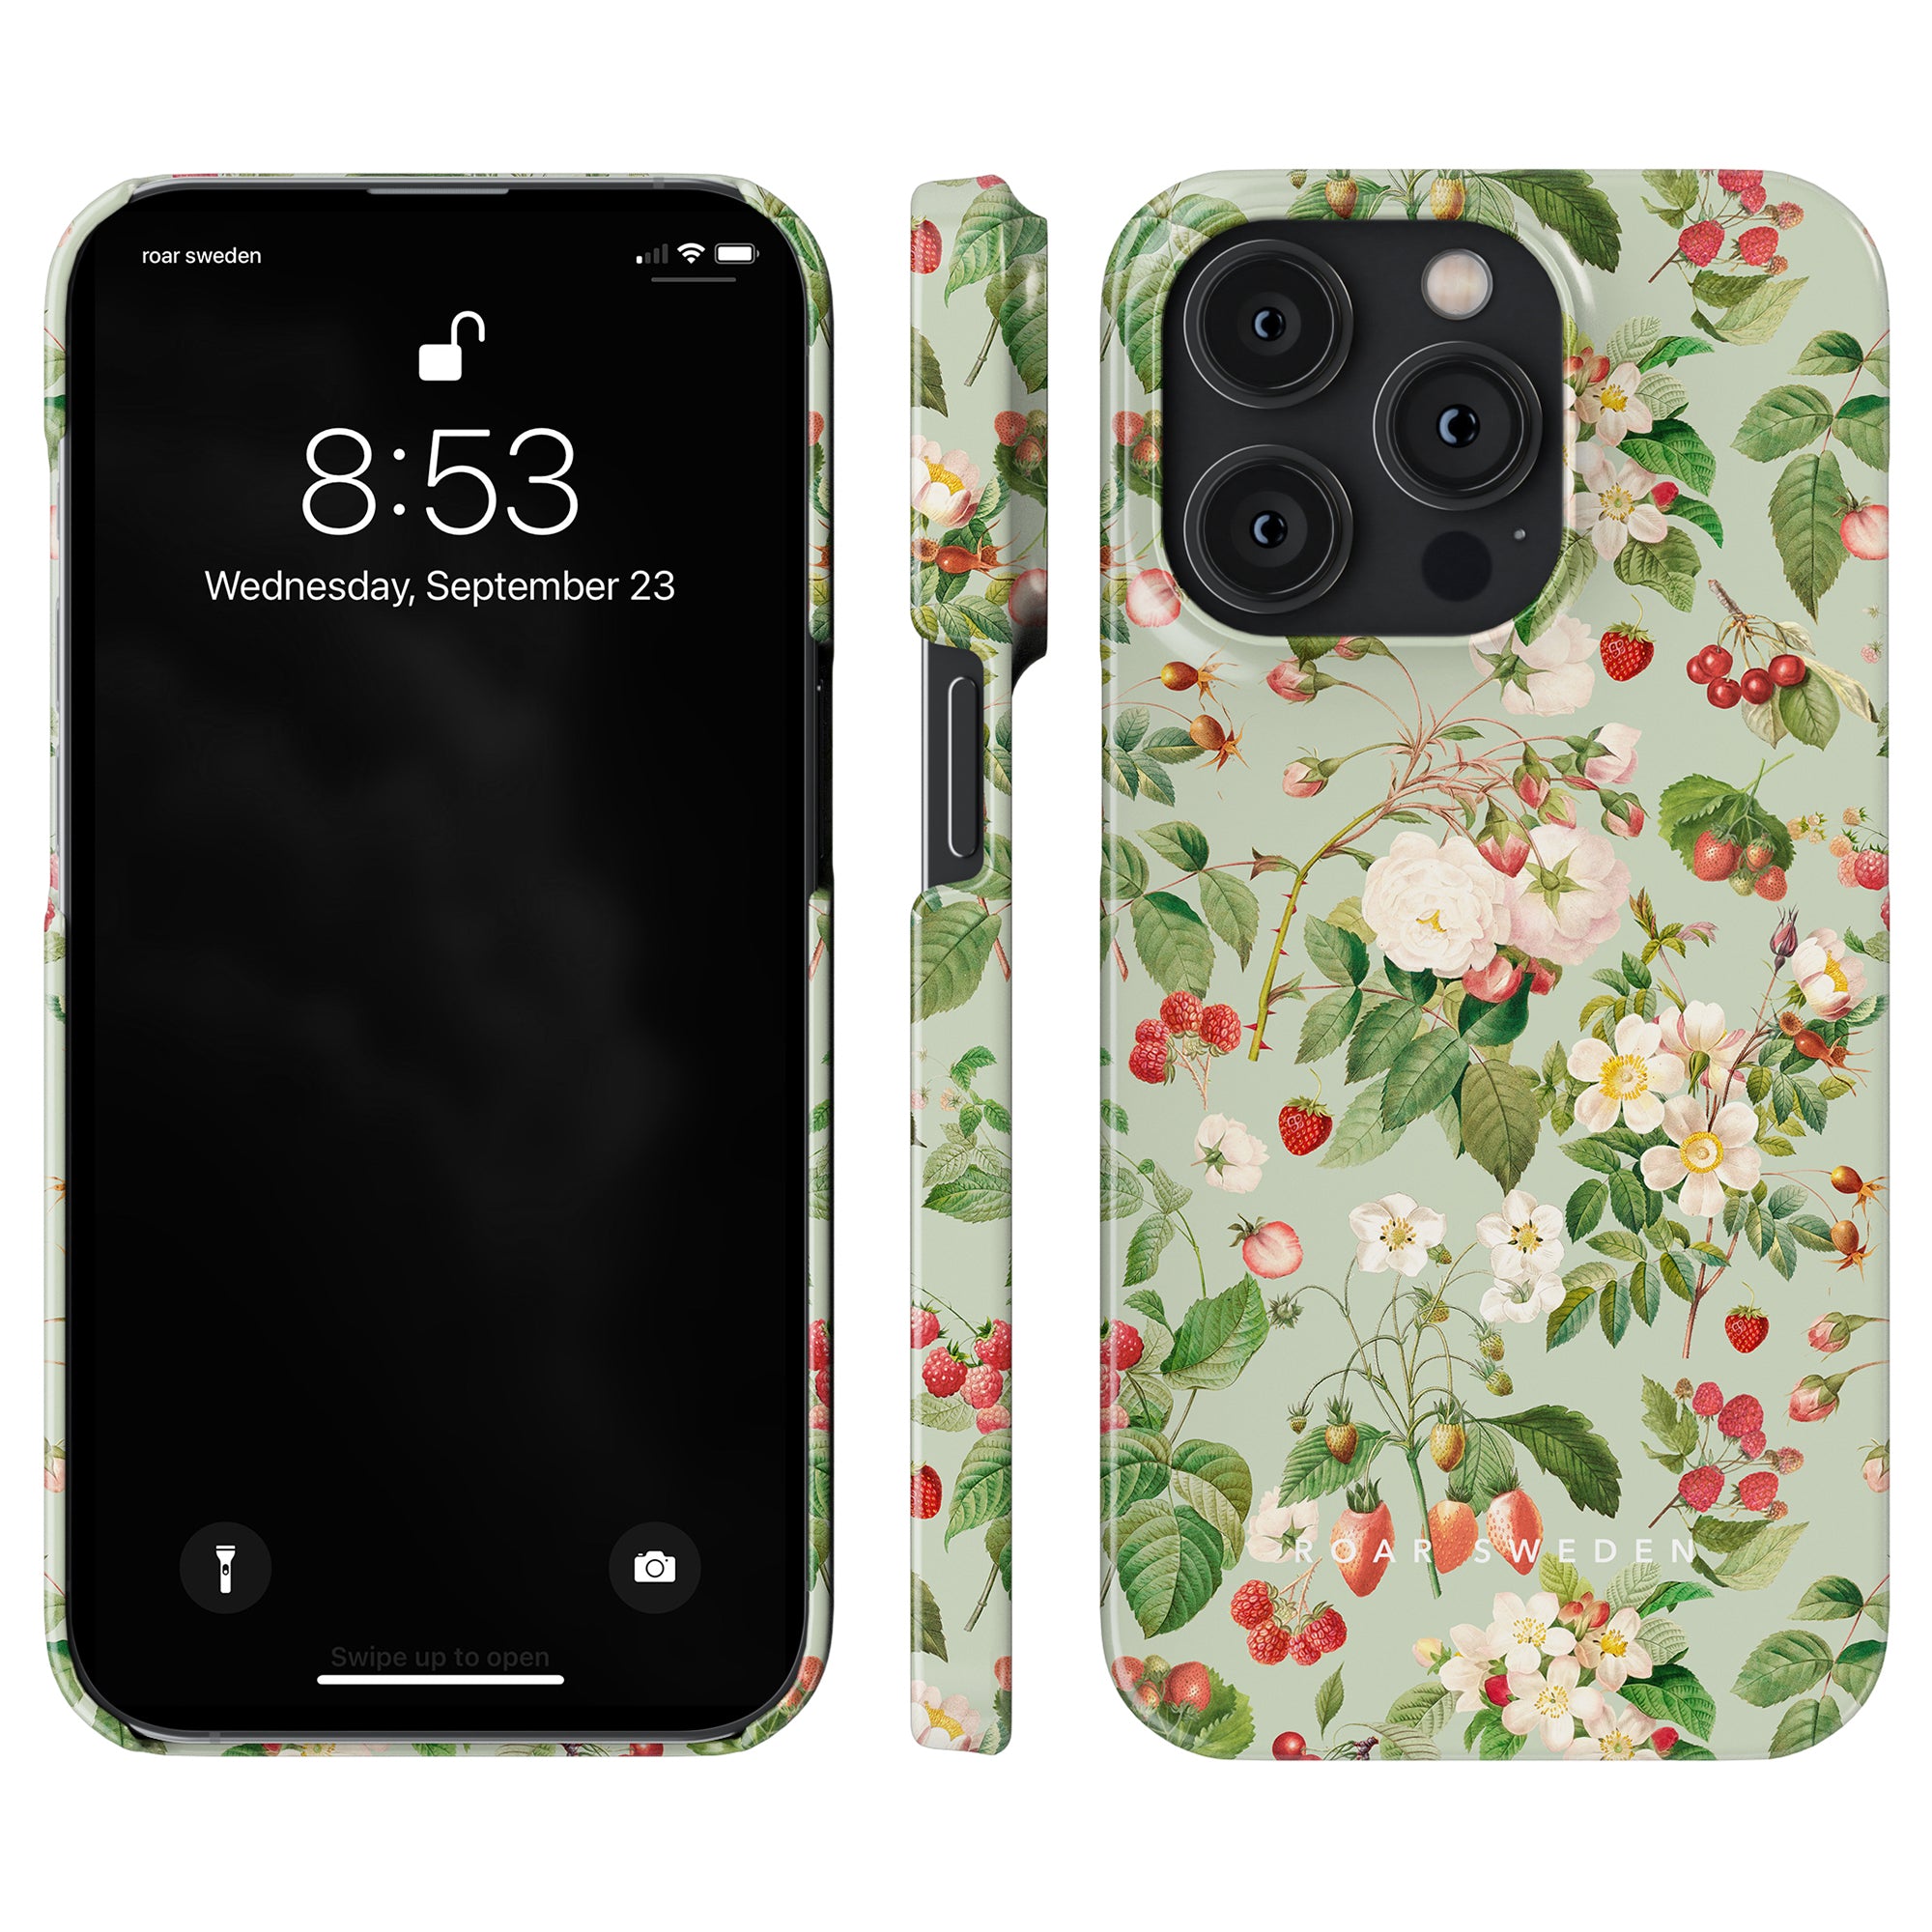 Tasty Garden - Slim case smartphone displaying the lock screen with the time and date, perfect for your product description needs. Enhanced with SEO.